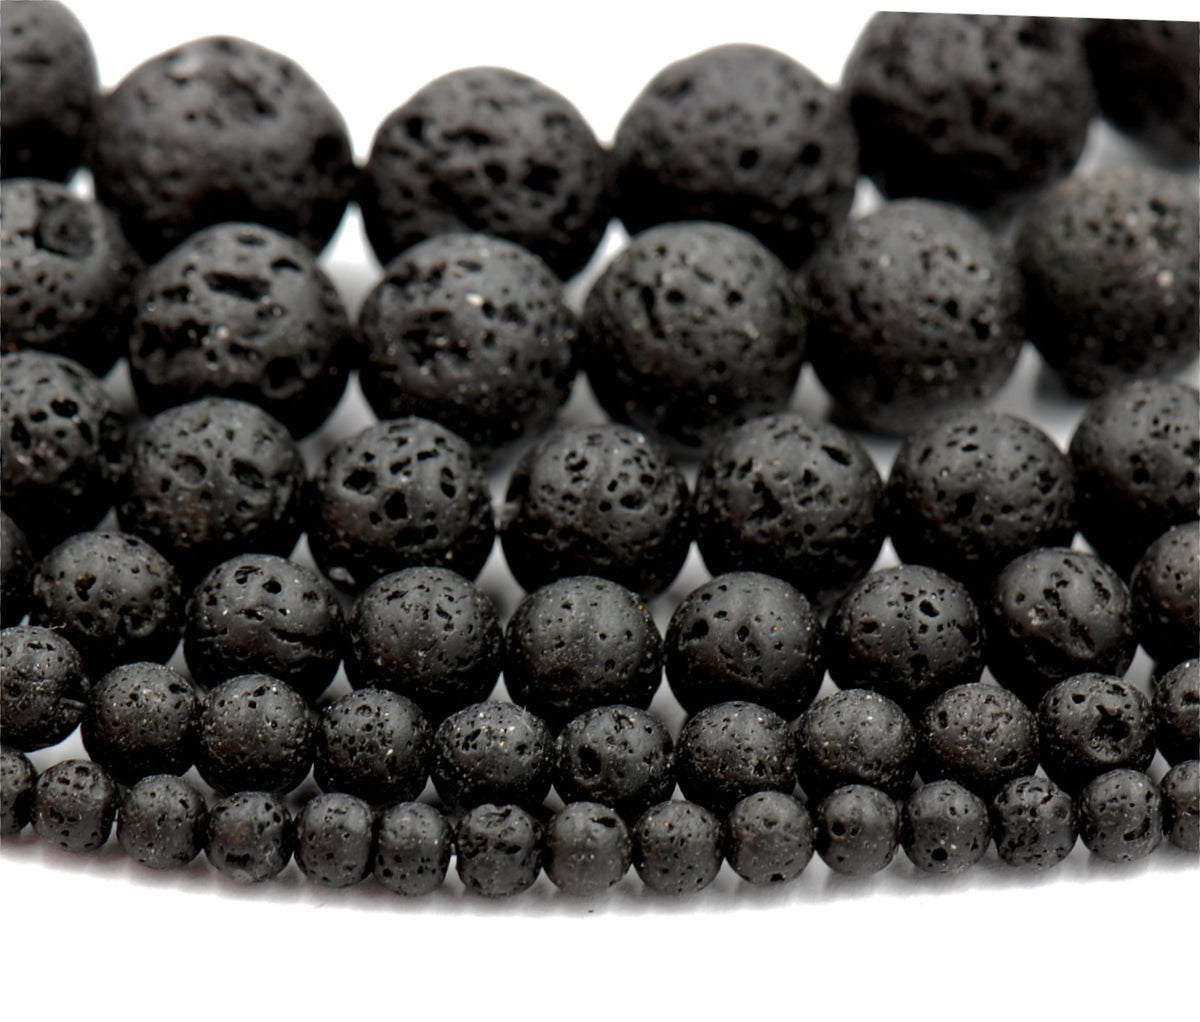 Black Lava Beads Natural Volcanic Rock Stone Beads For Jewelry